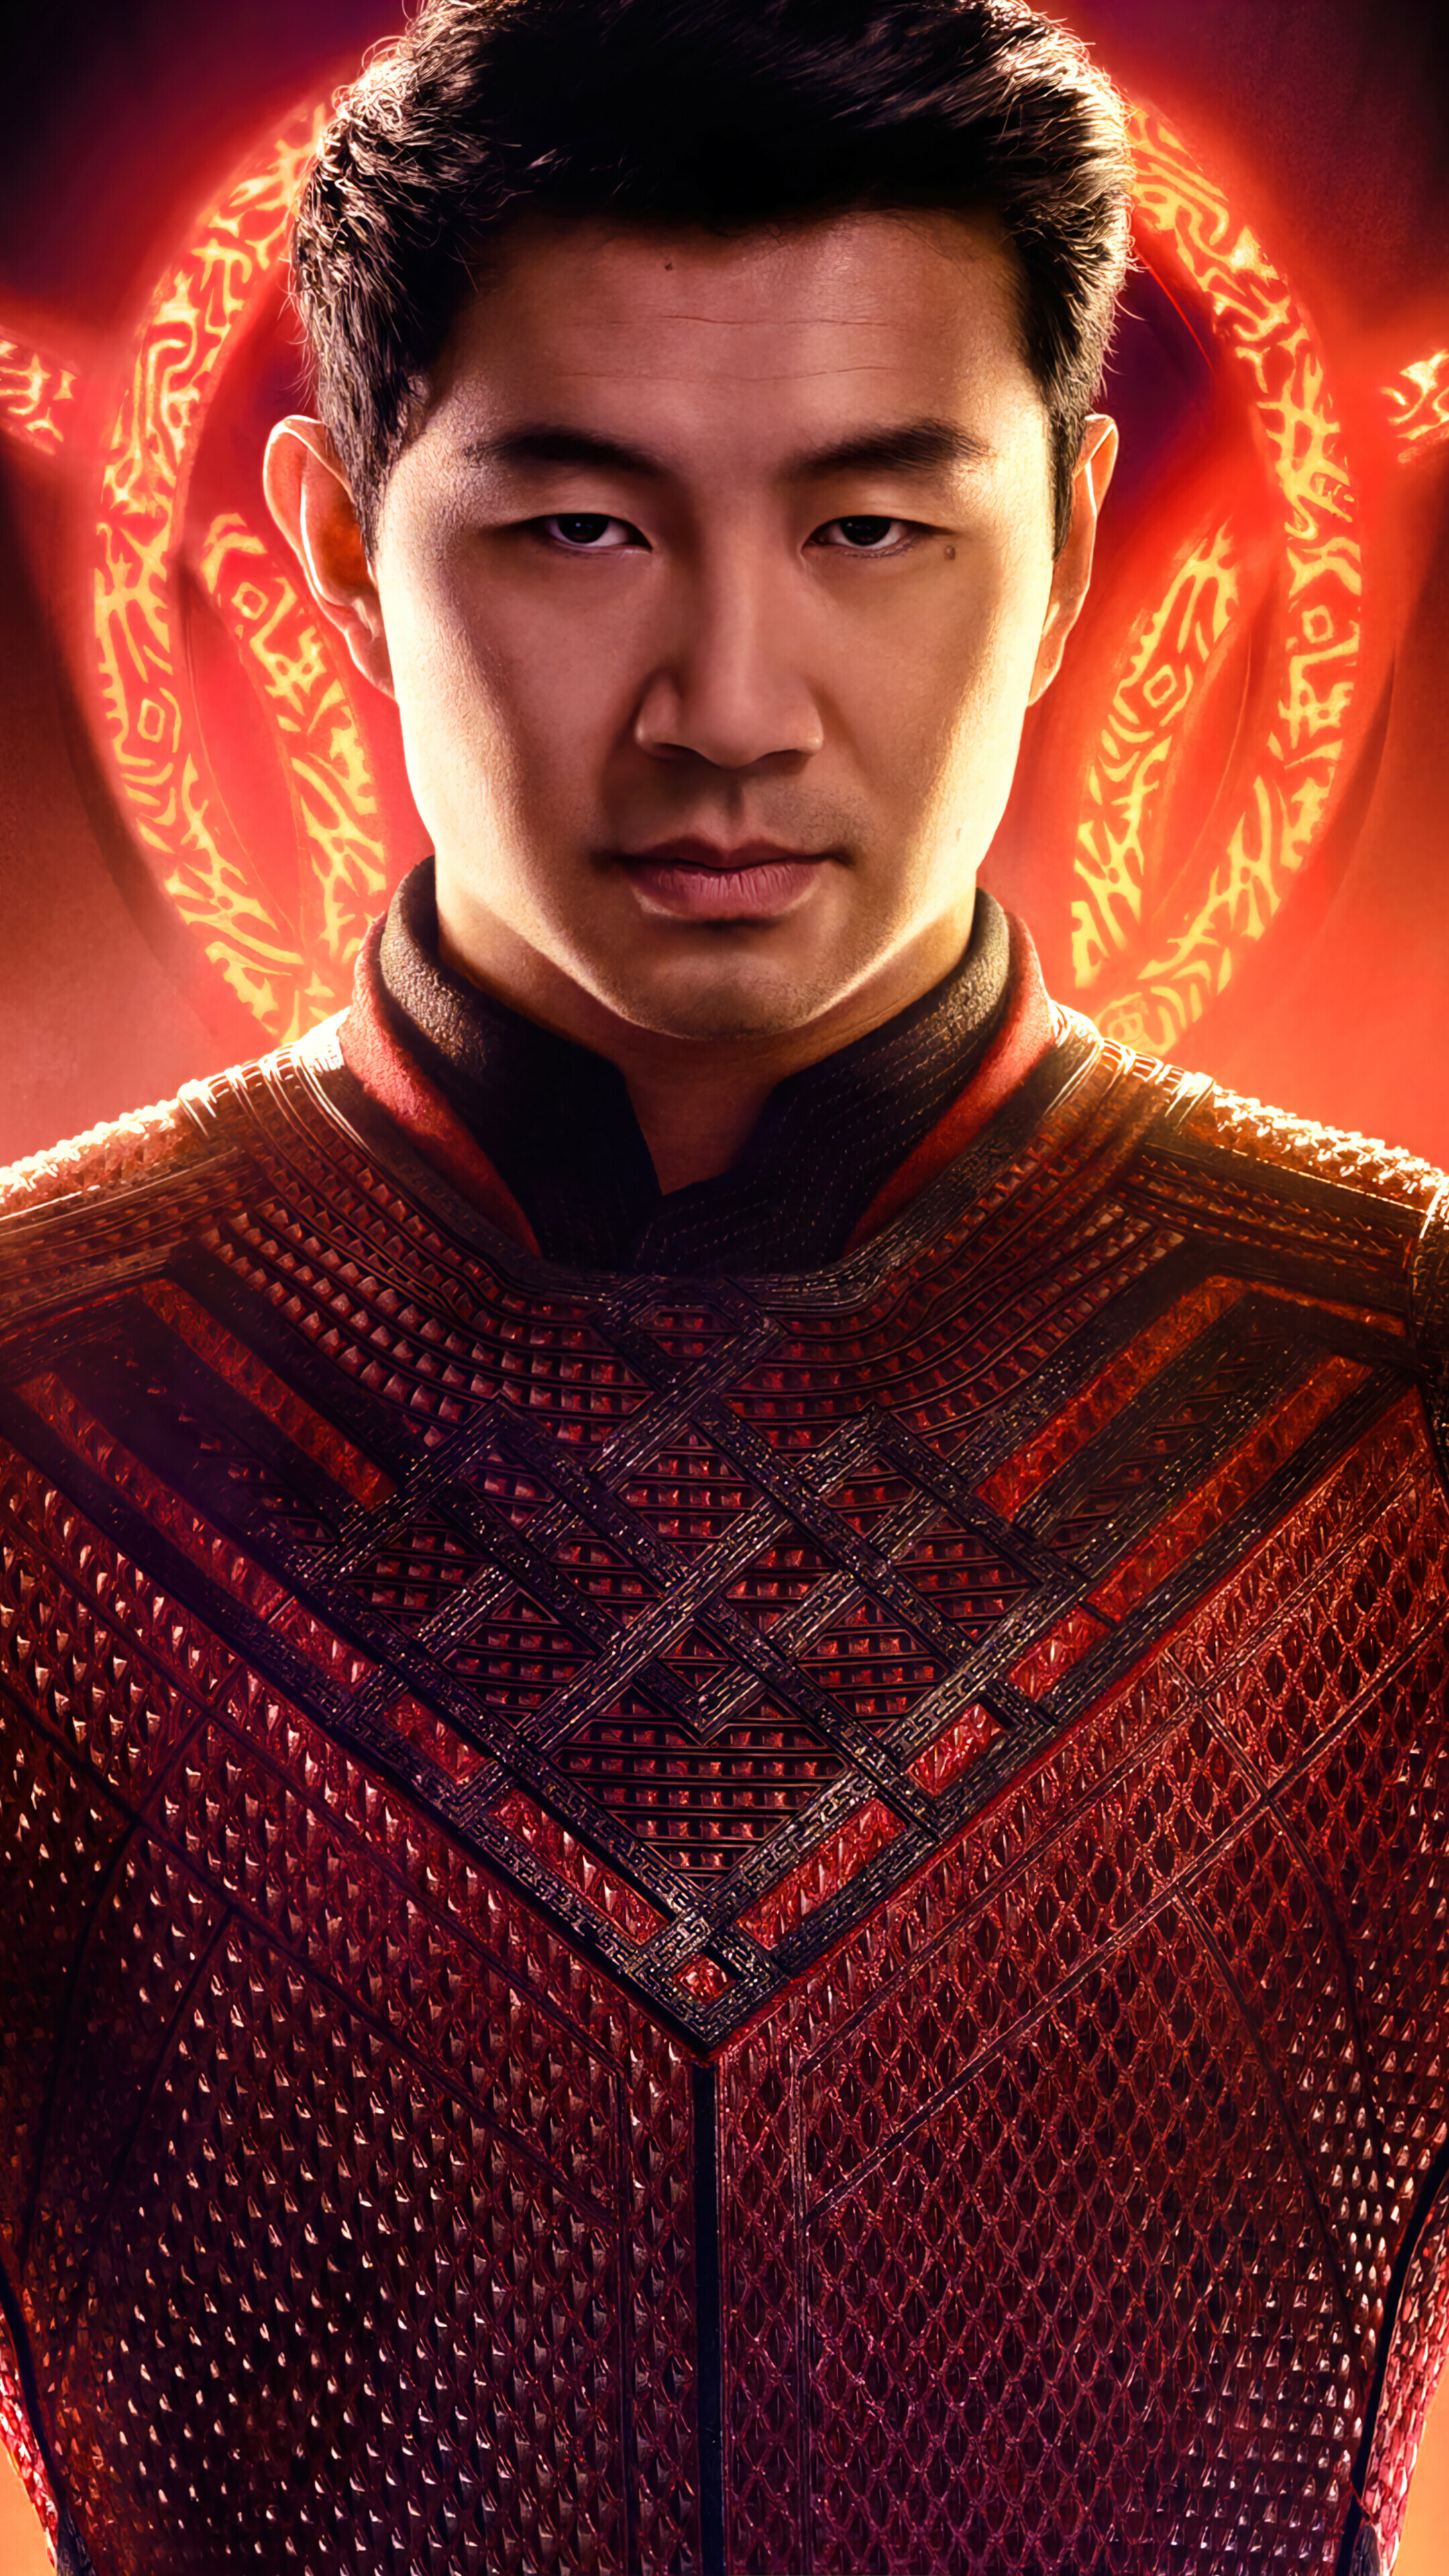 Shang-Chi and the Legend of the Ten Rings: It set several box office records and received positive reviews from critics, MCU. 2160x3840 4K Background.